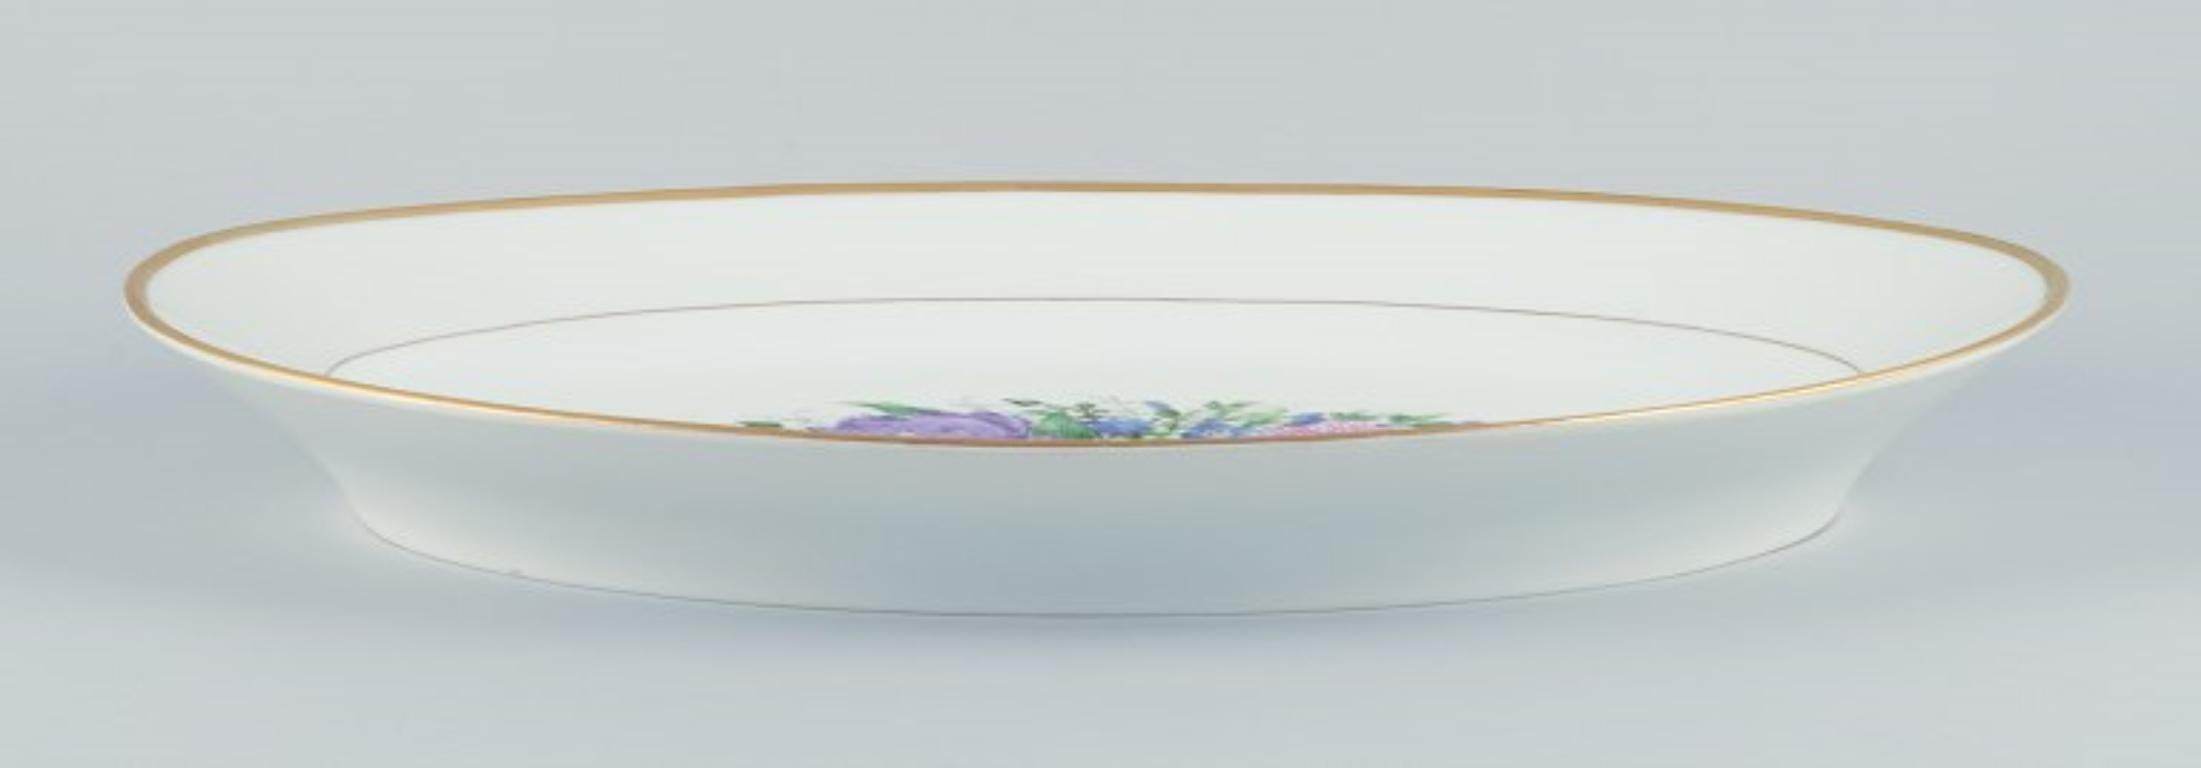 Bing & Grøndahl, large oval serving platter hand-painted with polychrome flower motifs and gold trim.
From the 1920s.
Marked.
First factory quality.
Perfect condition.
Dimensions: Length 46.5 cm x Depth 32.5 cm x Height 5.0 cm.